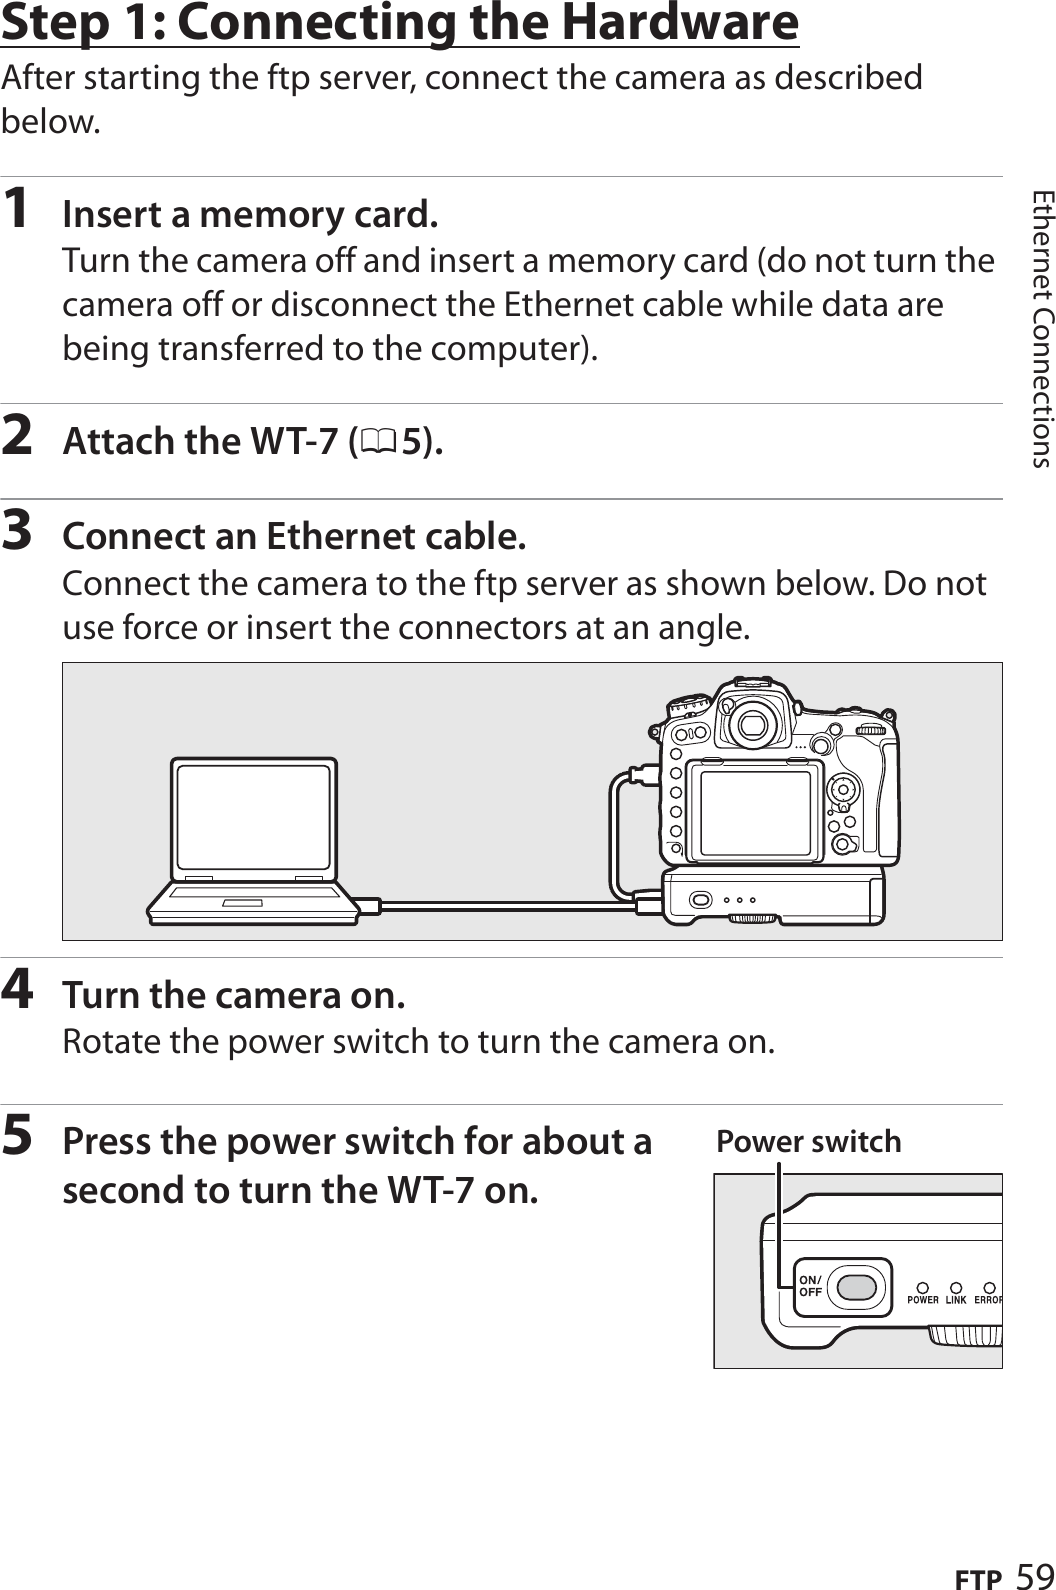 59FTPEthernet ConnectionsStep 1: Connecting the HardwareAfter starting the ftp server, connect the camera as described below.1Insert a memory card.Turn the camera off and insert a memory card (do not turn the camera off or disconnect the Ethernet cable while data are being transferred to the computer).2Attach the WT-7 (05).3Connect an Ethernet cable.Connect the camera to the ftp server as shown below. Do not use force or insert the connectors at an angle.4Turn the camera on.Rotate the power switch to turn the camera on.5Press the power switch for about a second to turn the WT-7 on.Power switch